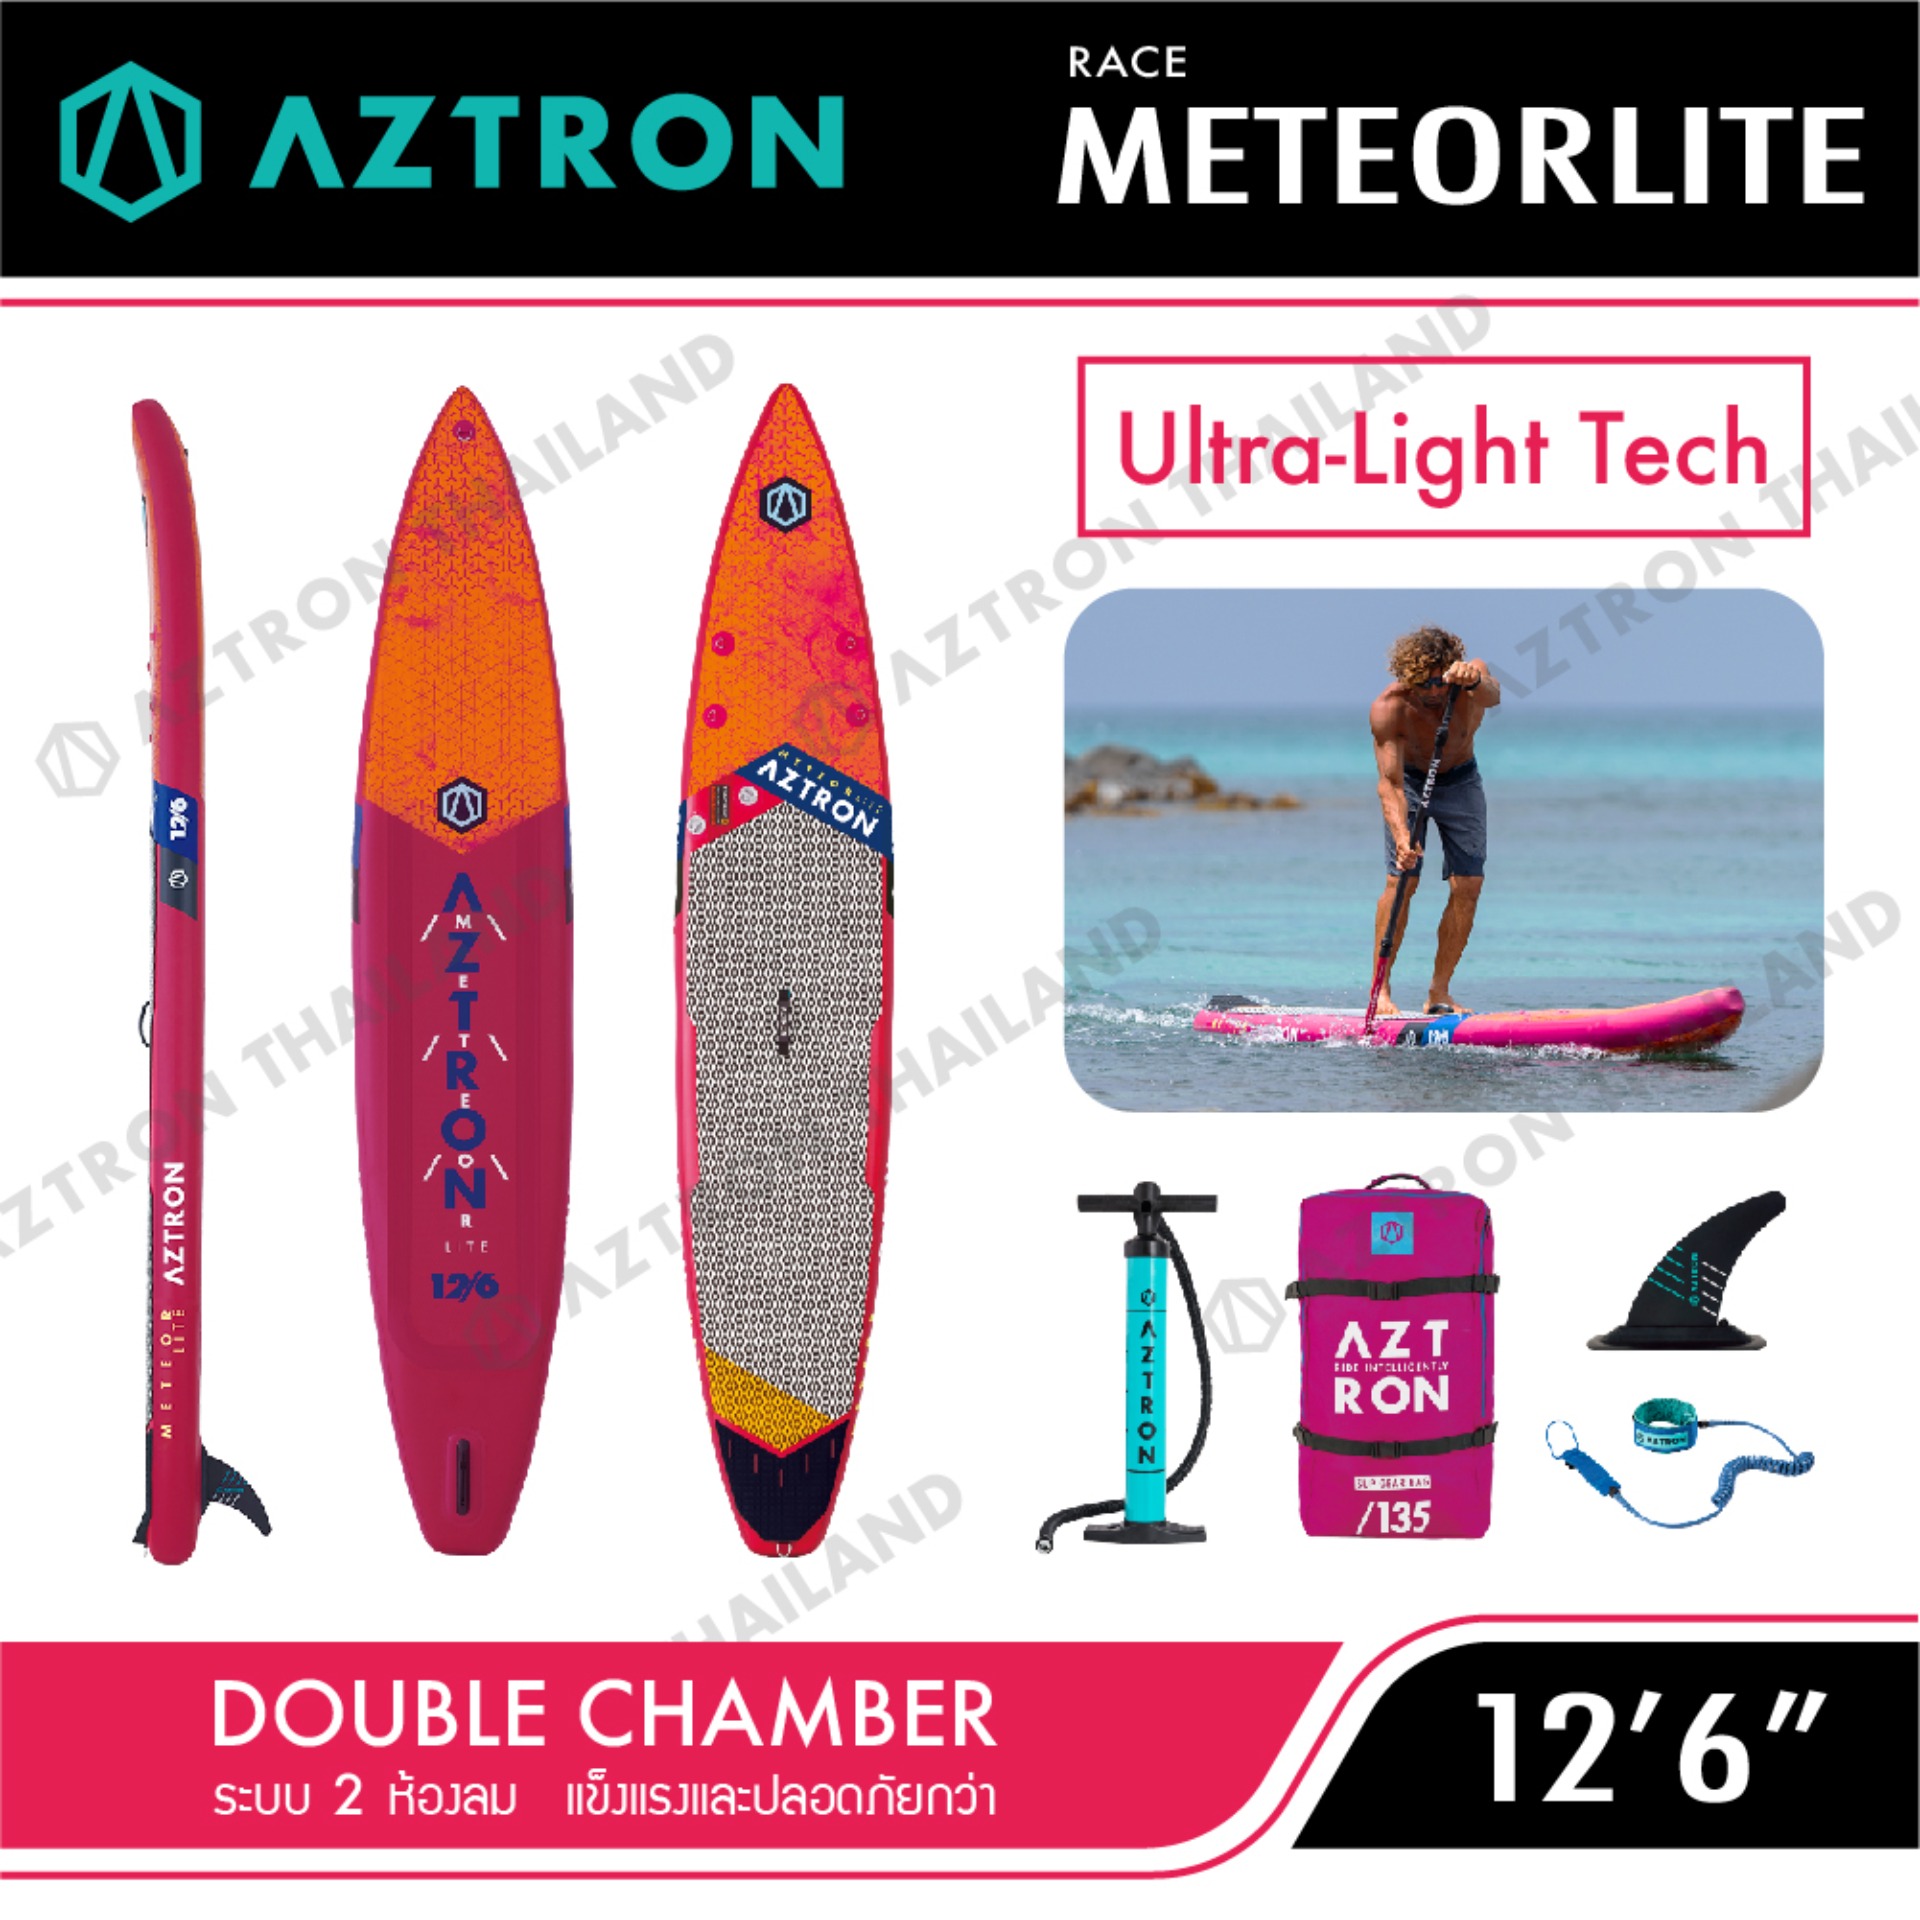 AZTRON SUP METEOR Lite 12'6 INFLATABLE STAND UP PADDLE BOARD SUP บอร์ดยืนพาย